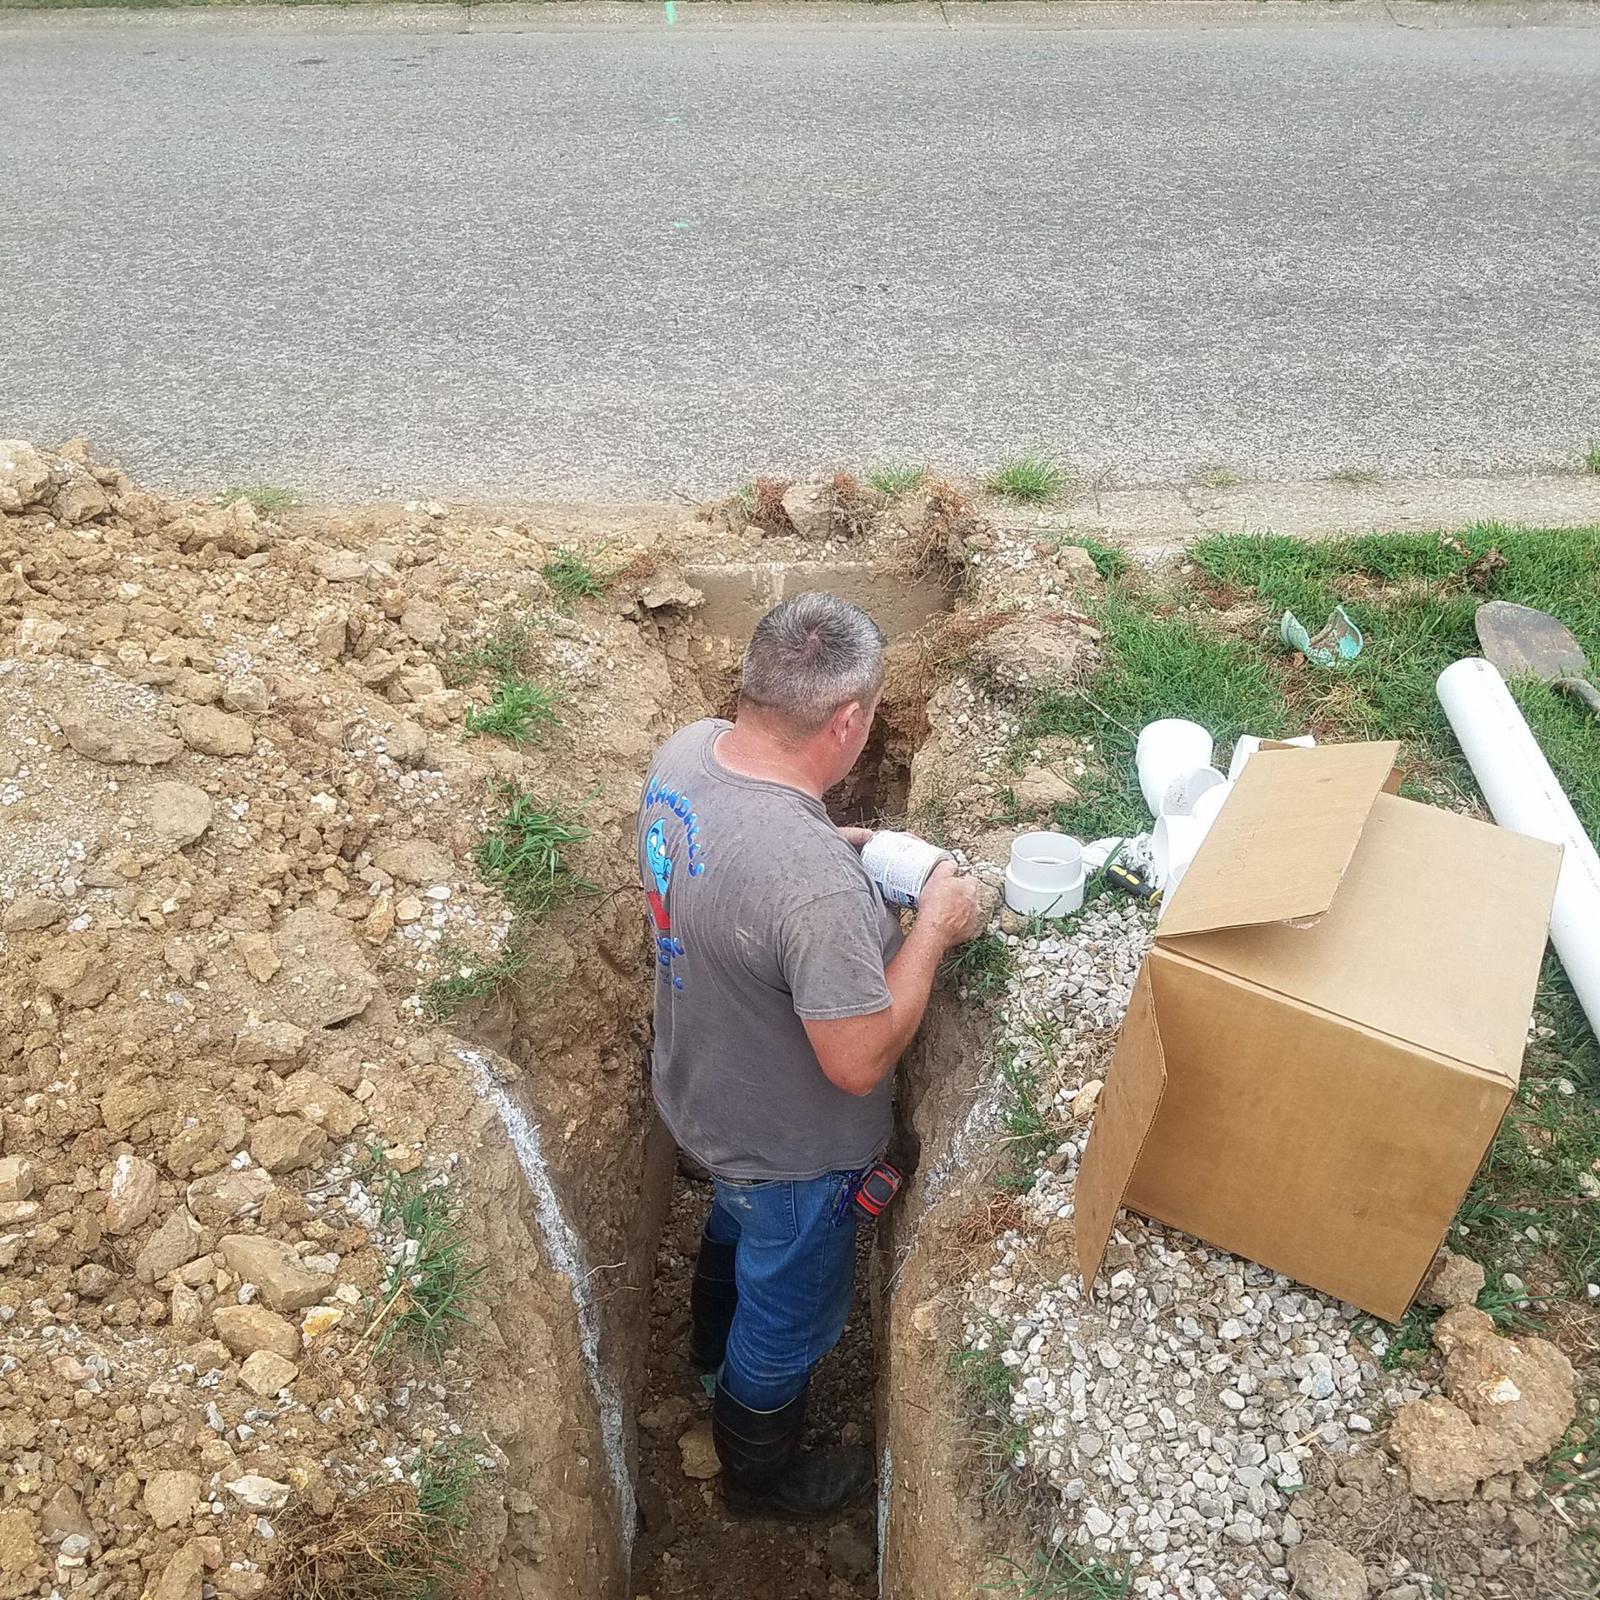 Randy connecting a new sewer drain to the city sewer under the street.